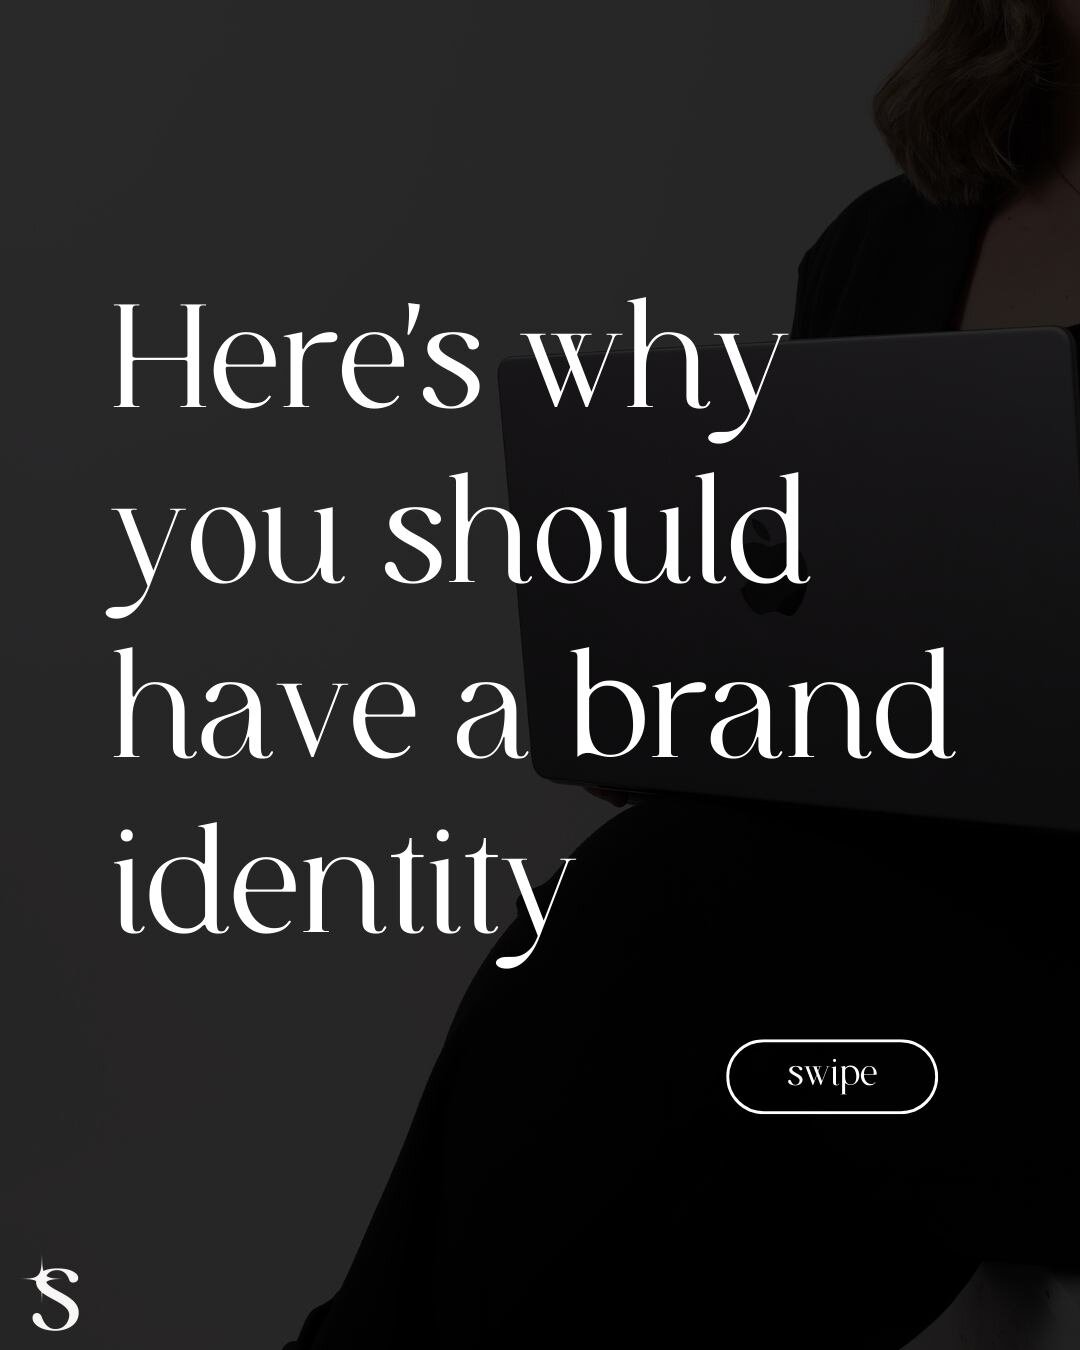 Don't underestimate the power of a strong, cohesive and effective brand identity...SWIPE to see why 👉

Let's take your brand to the next level. Send us a DM or email to get started 🖤✨

--
 #creativeagency #socialmediamanagement #designmarketing #ha